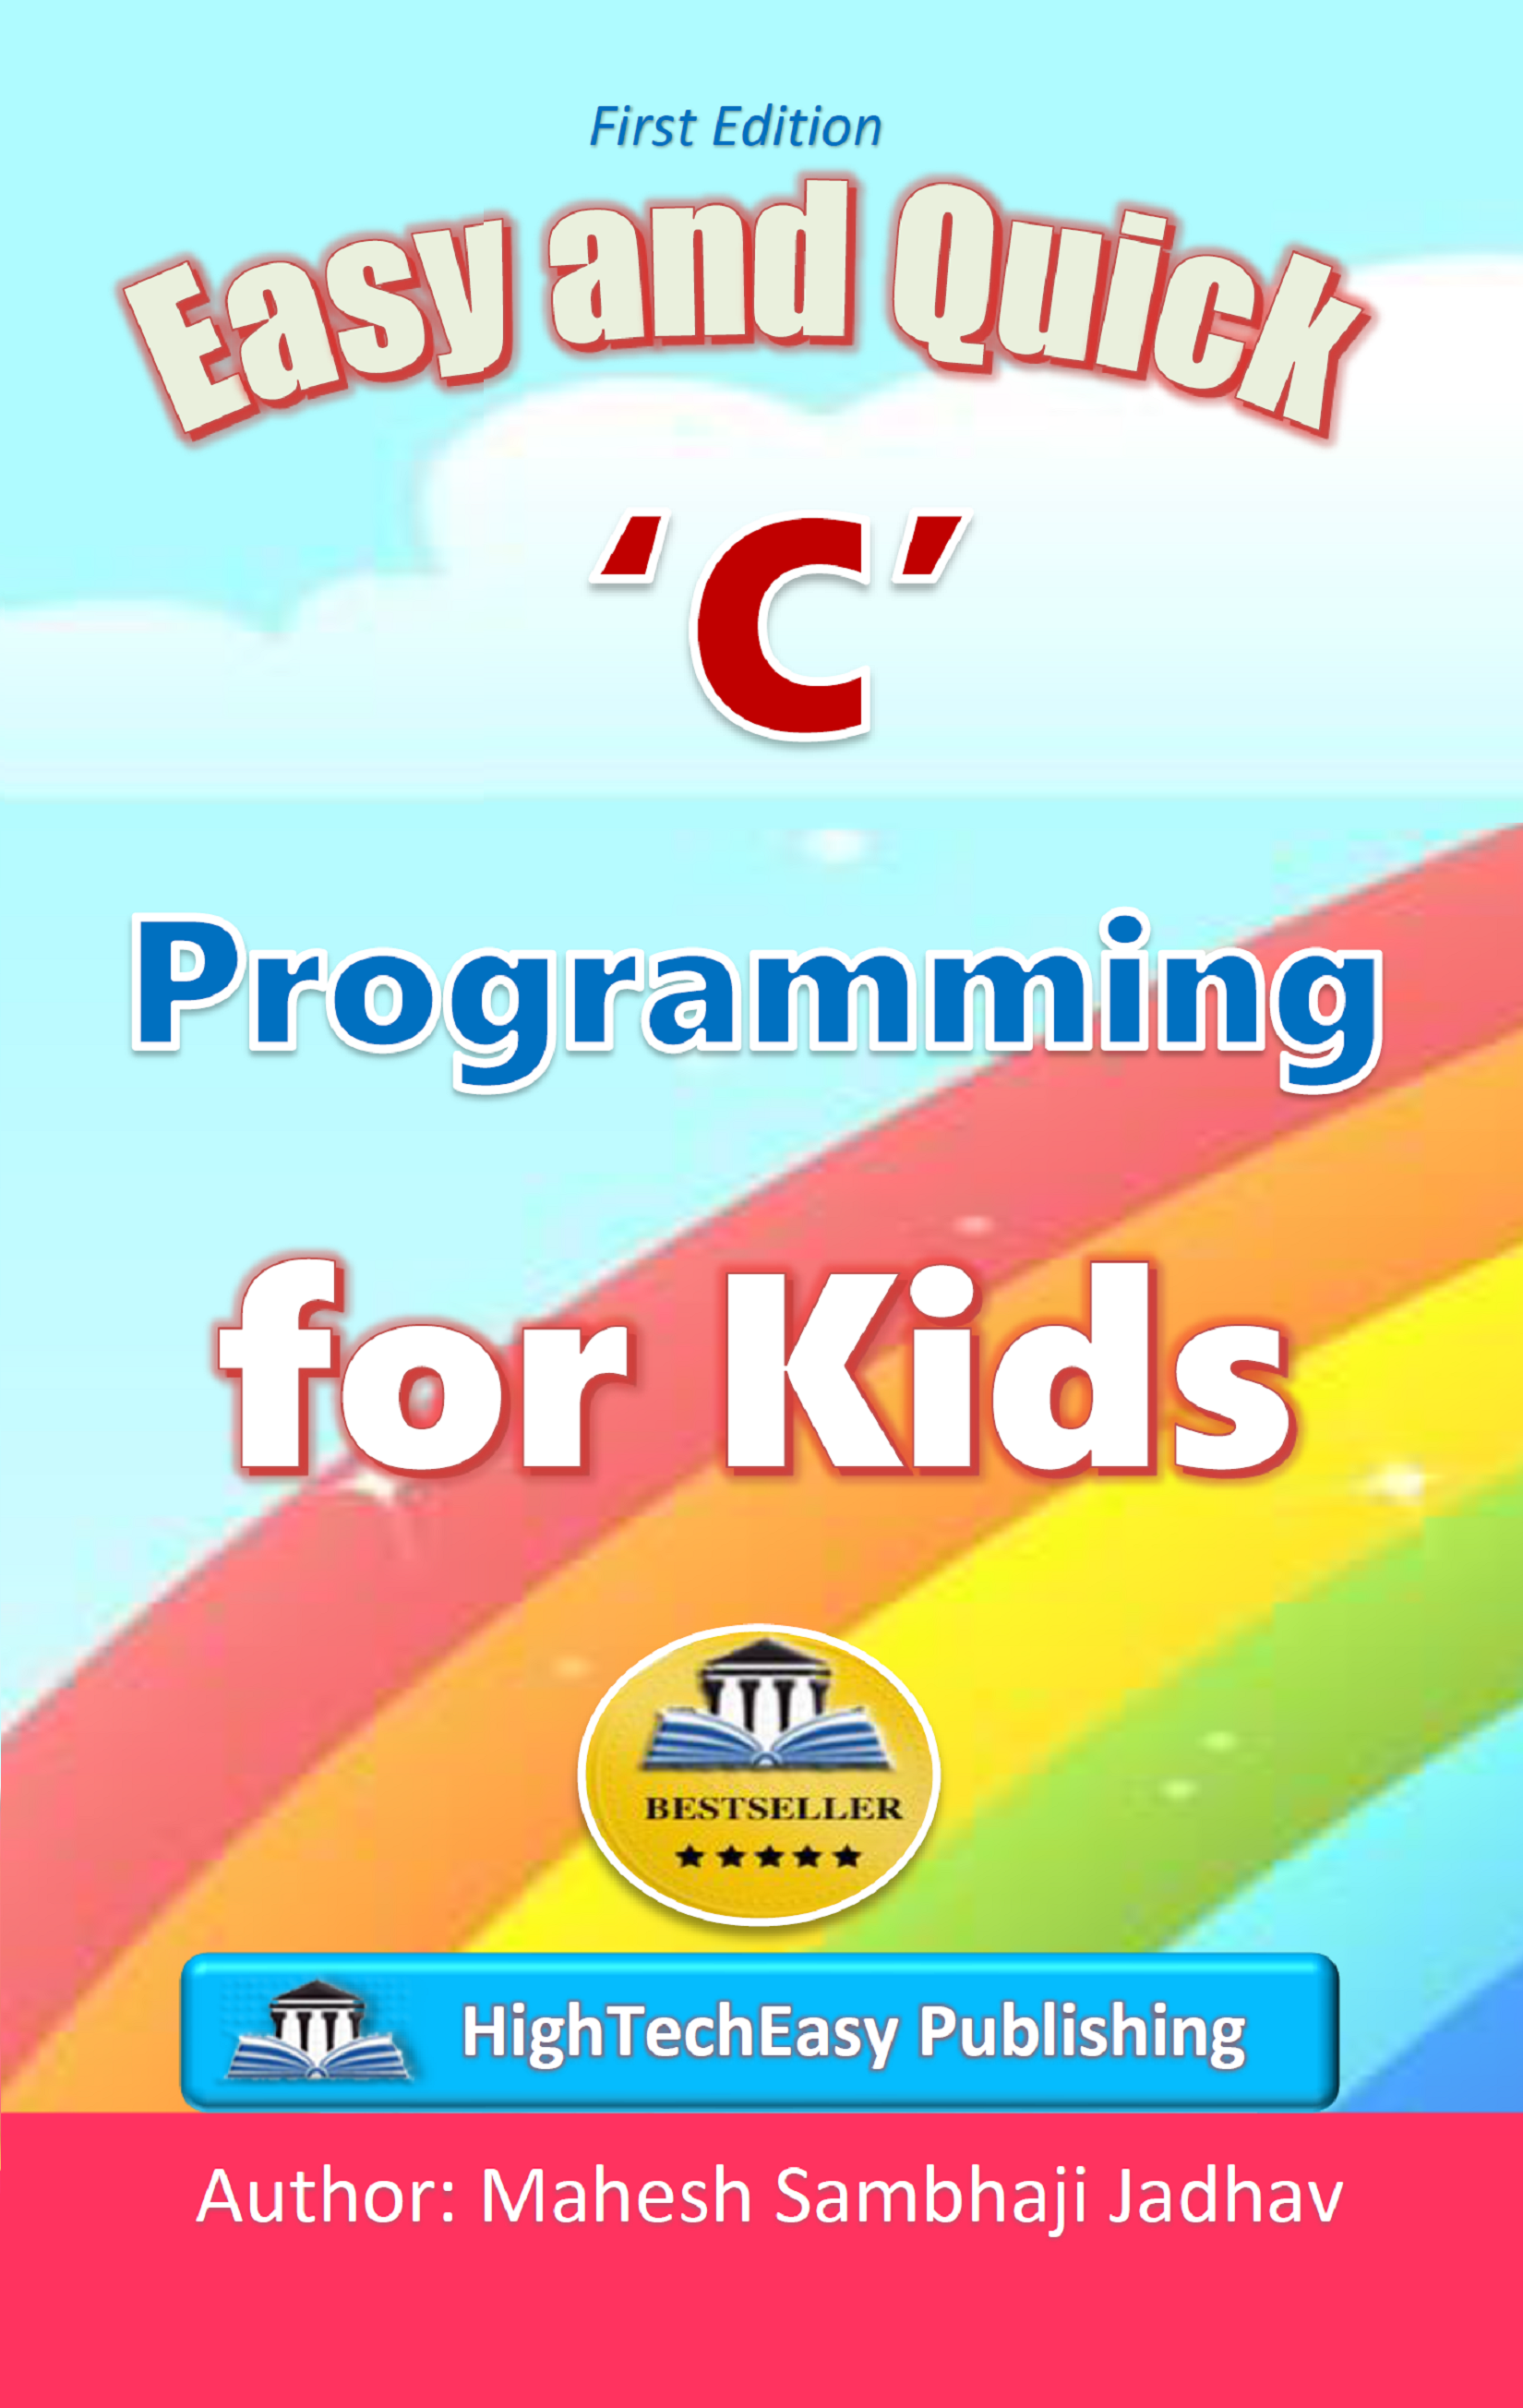 Easy and Quick C Programming for kids